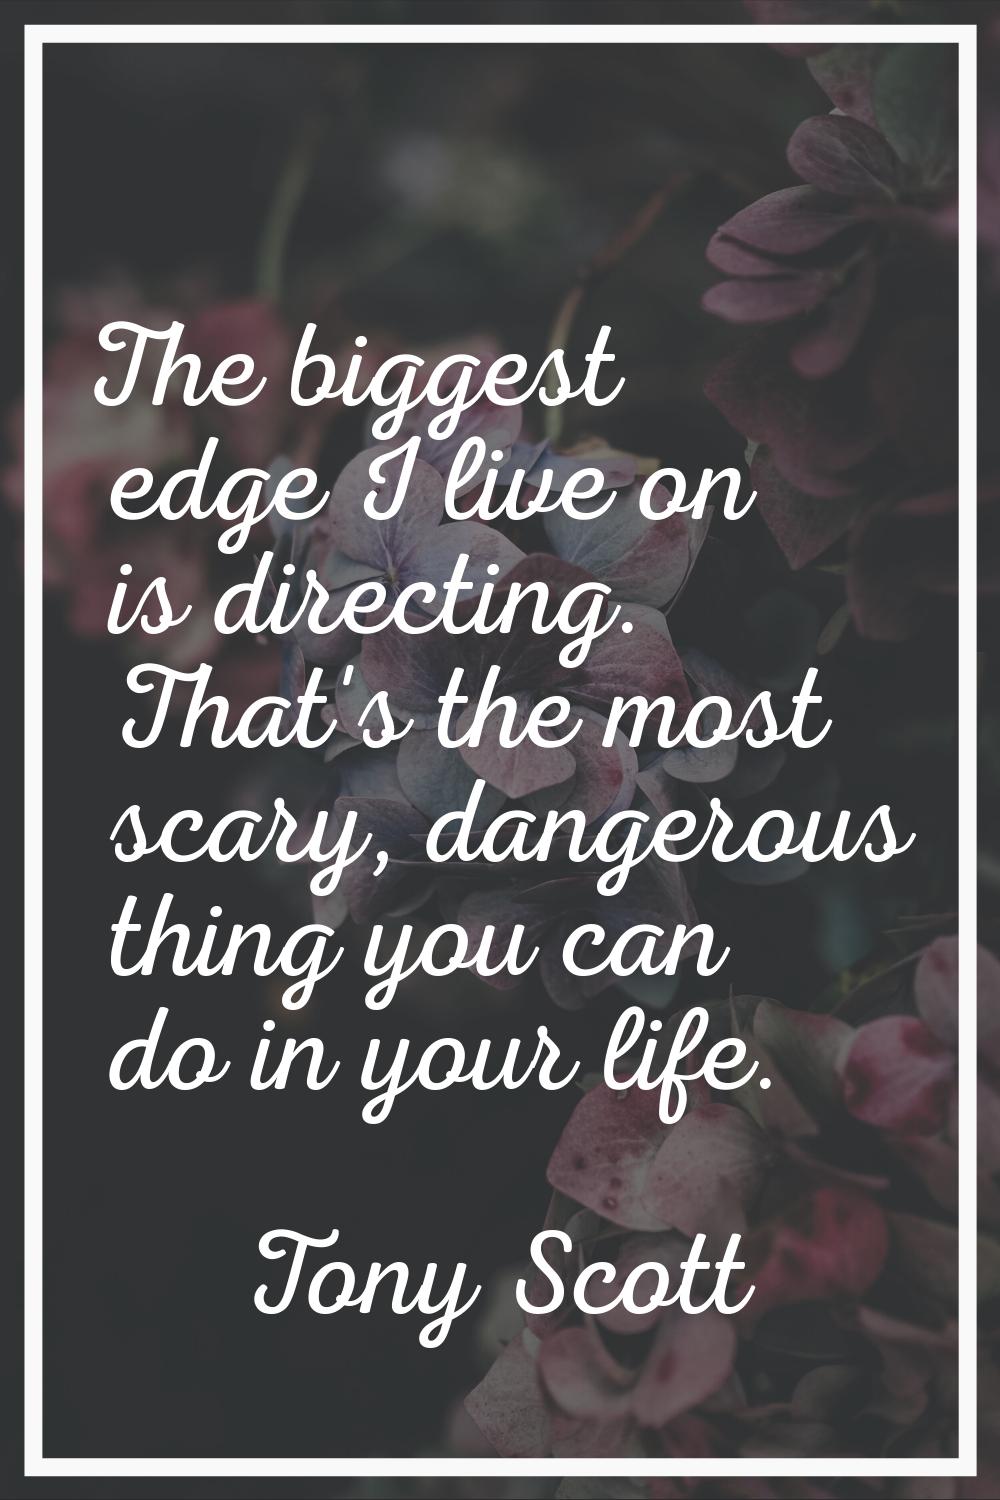 The biggest edge I live on is directing. That's the most scary, dangerous thing you can do in your 